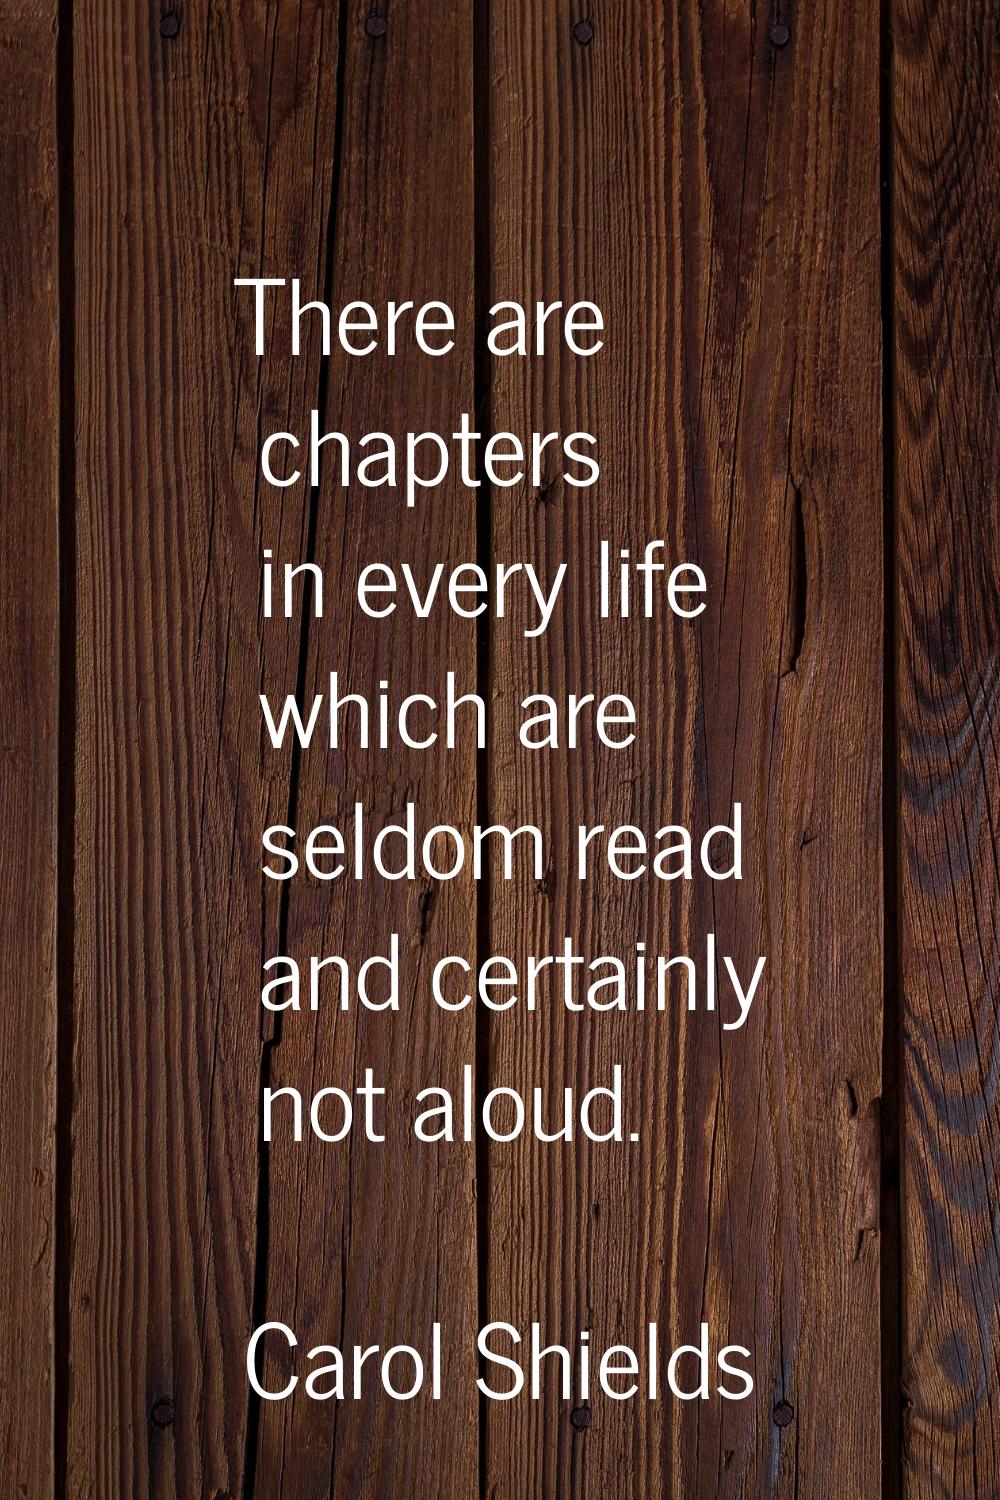 There are chapters in every life which are seldom read and certainly not aloud.